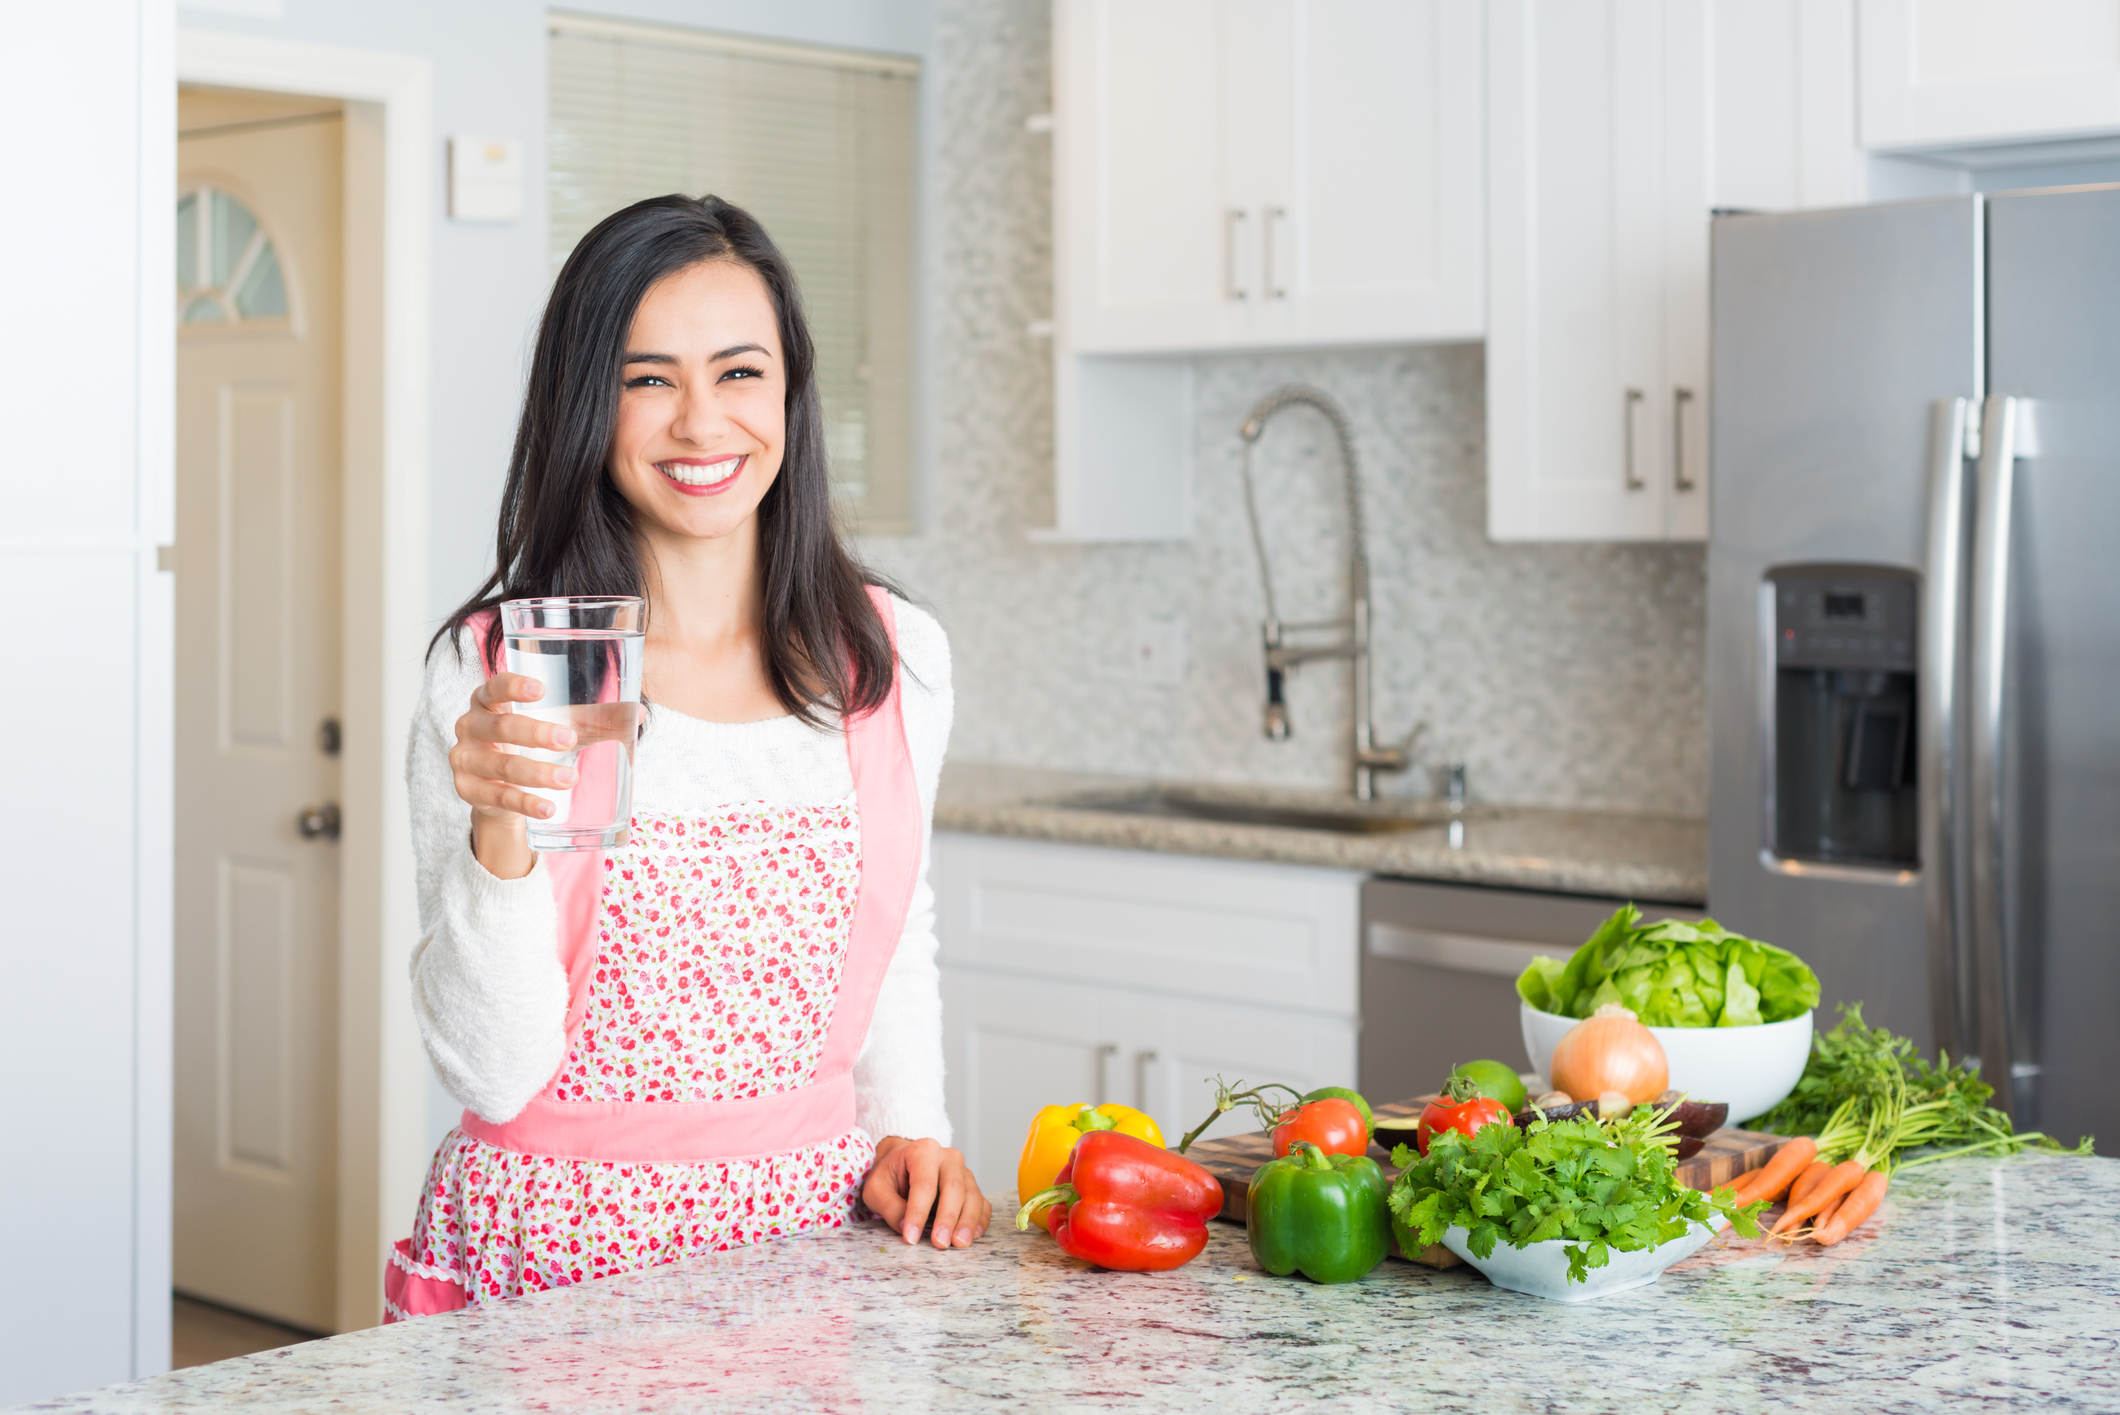 Young Hispanic Women Preparing a Meal Holding A Glass Of Water. Traditional Mexican cuisine.  Salsa, guacamole, limes, cilantro, avocado, carrots, onion,